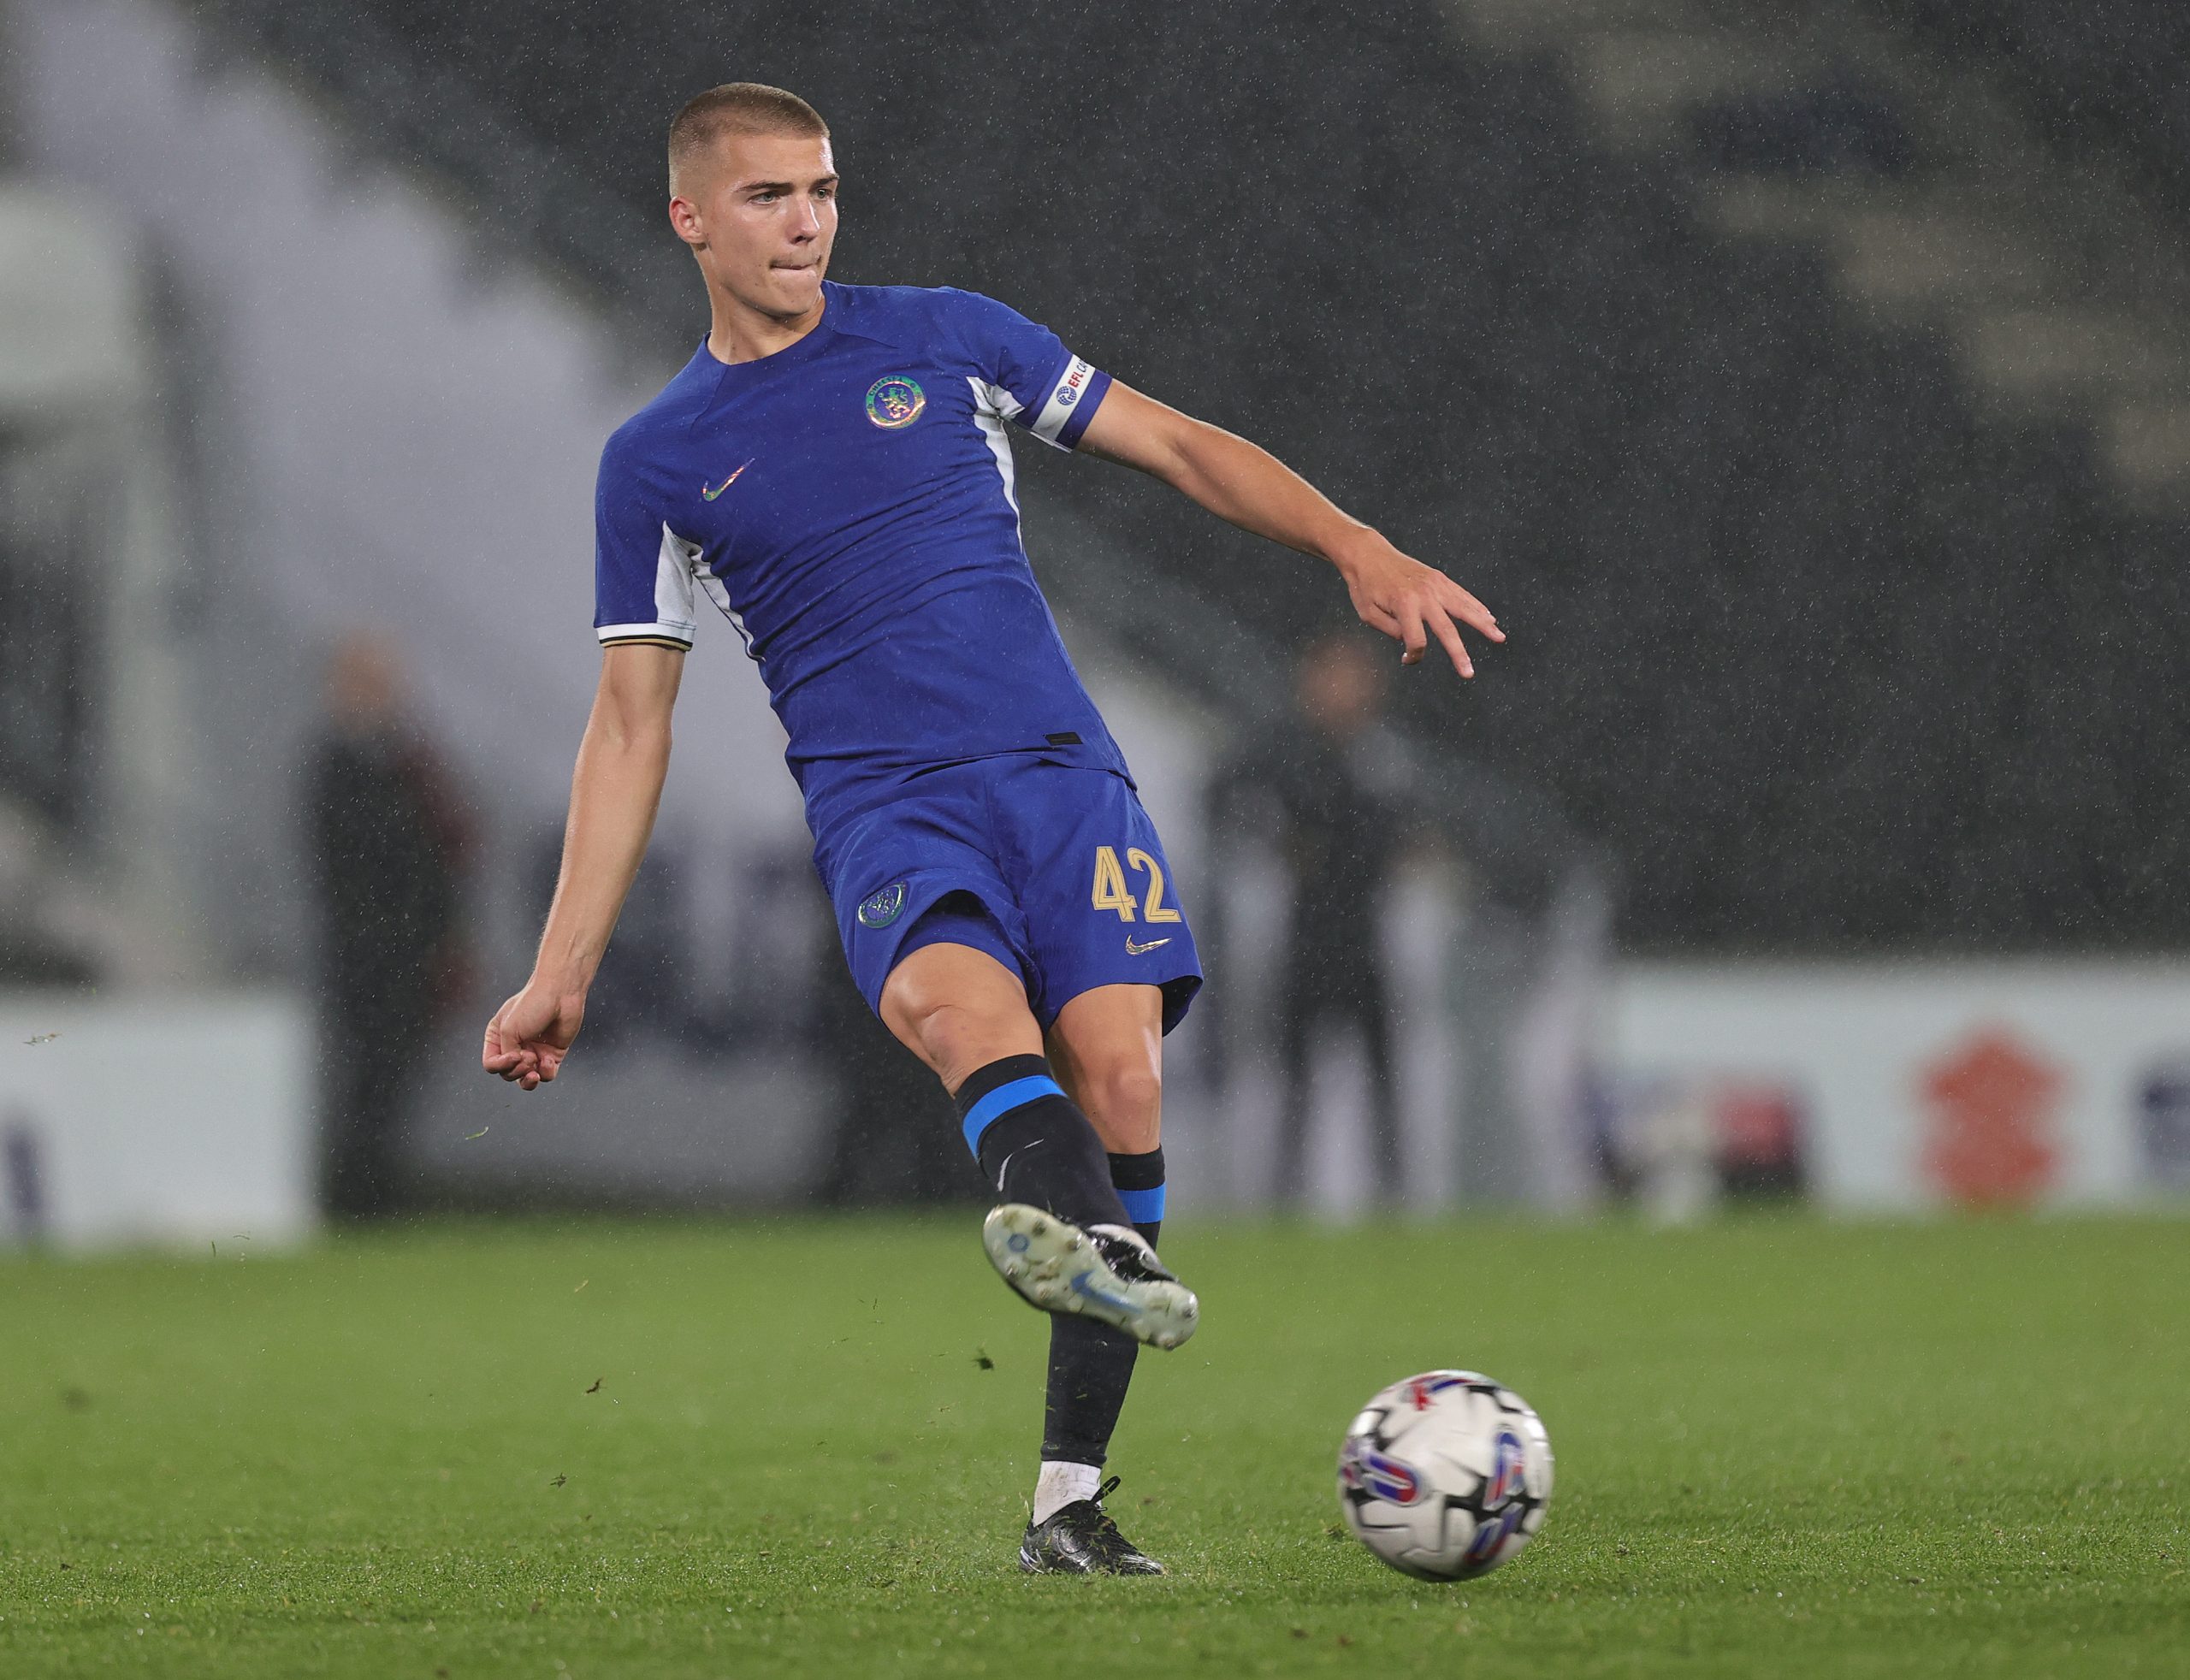 MILTON KEYNES, ENGLAND - AUGUST 29: Alfie Gilchrist of Chelsea U21 in action during the EFL Trophy match between Milton Keynes Dons and Chelsea U21 at Stadium mk on August 29, 2023 in Milton Keynes, England. (Photo by Pete Norton/Getty Images)